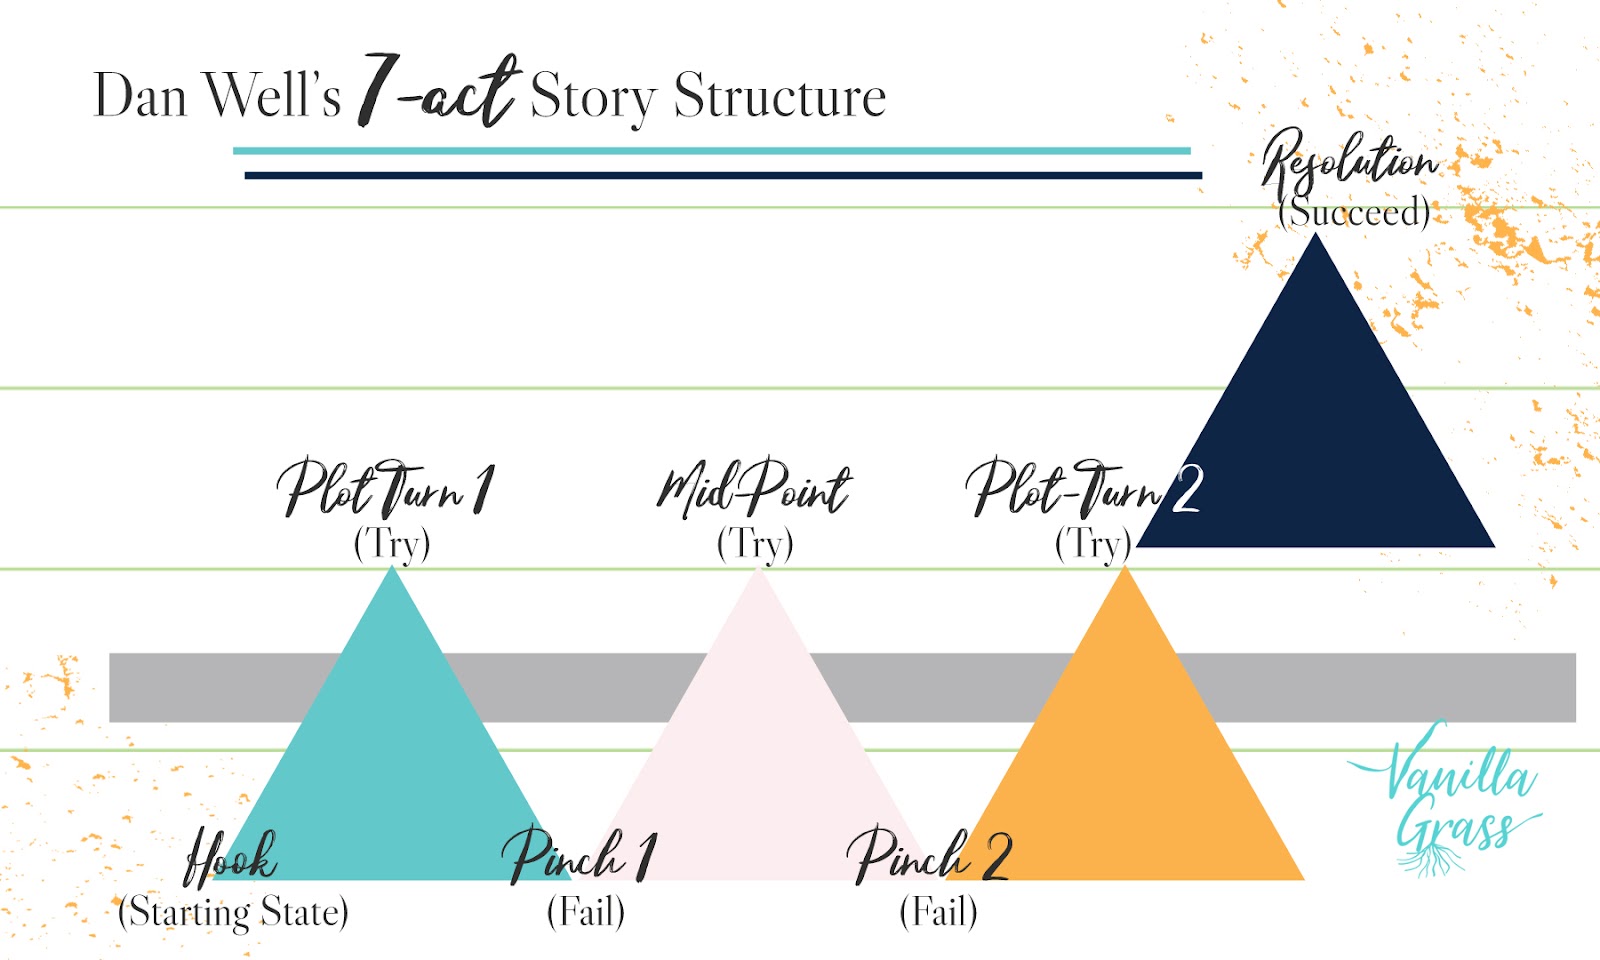 A graph showing Dan Wells' 7-Point Story Plot Structure with try/fail cycle.